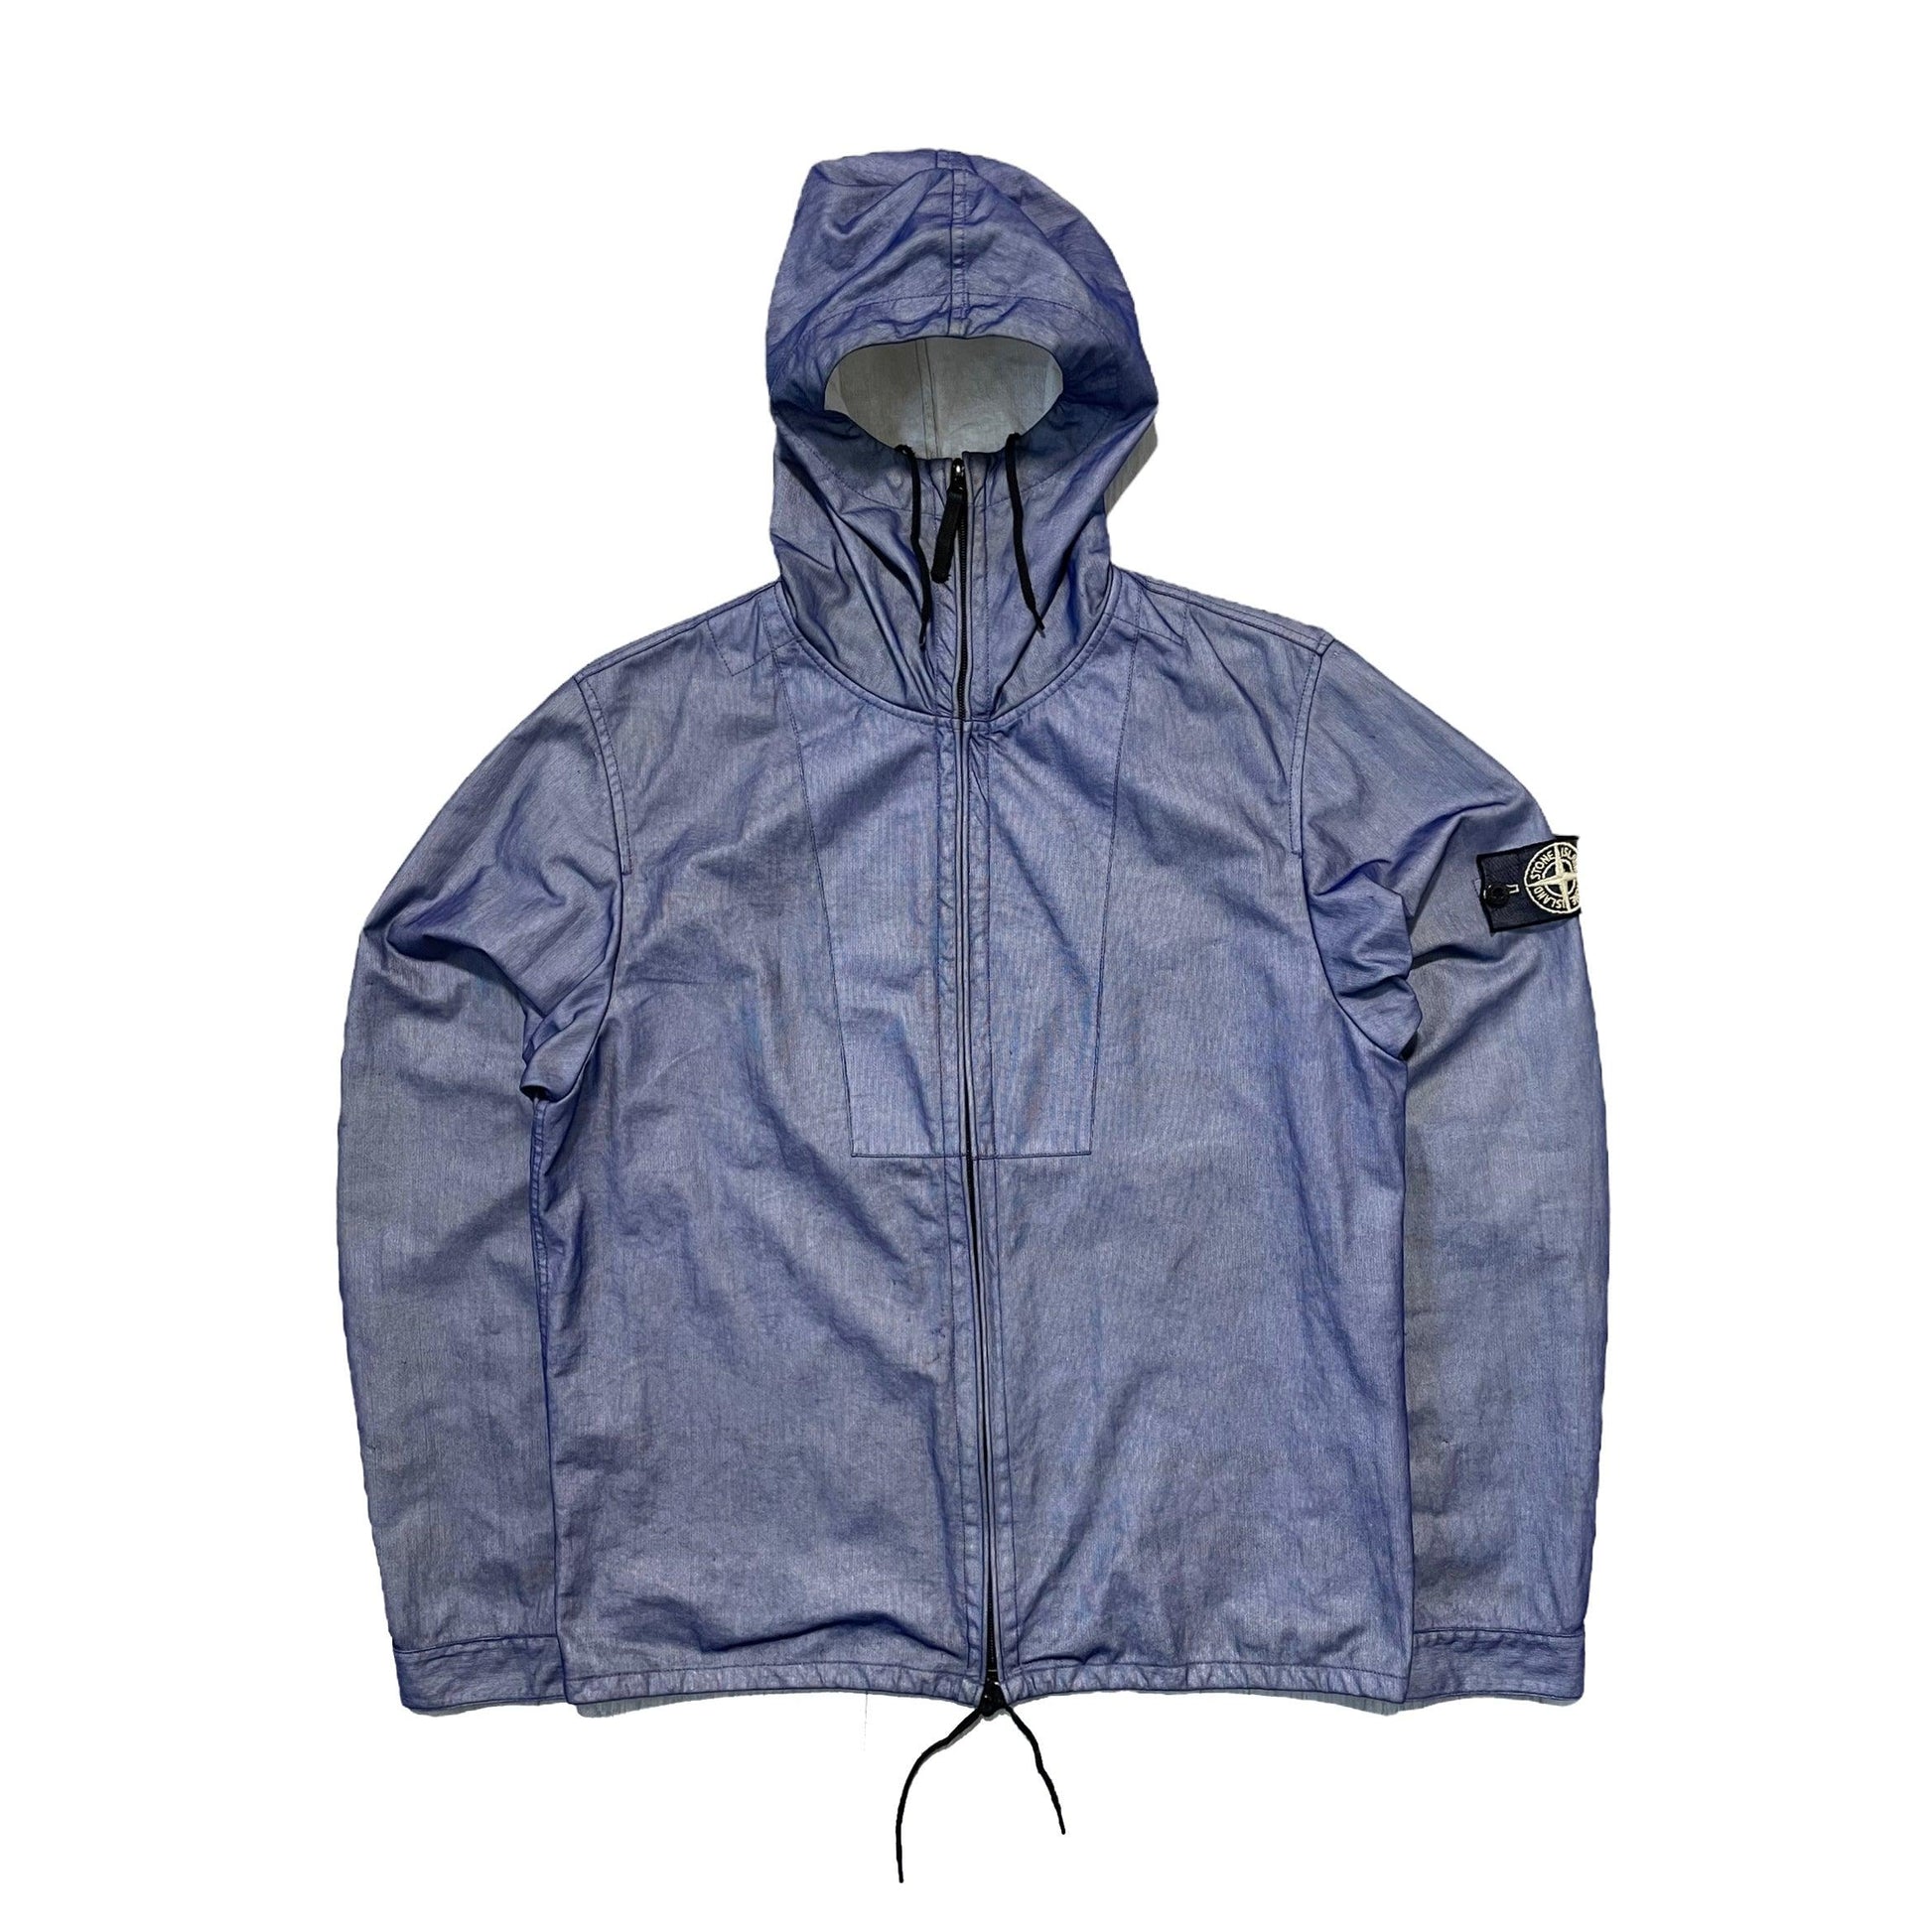 Stone Island Snowflake “In an avalanche no single snowflake feels responsible” Tyvek Jacket with Mesh Special Process Badge - Known Source